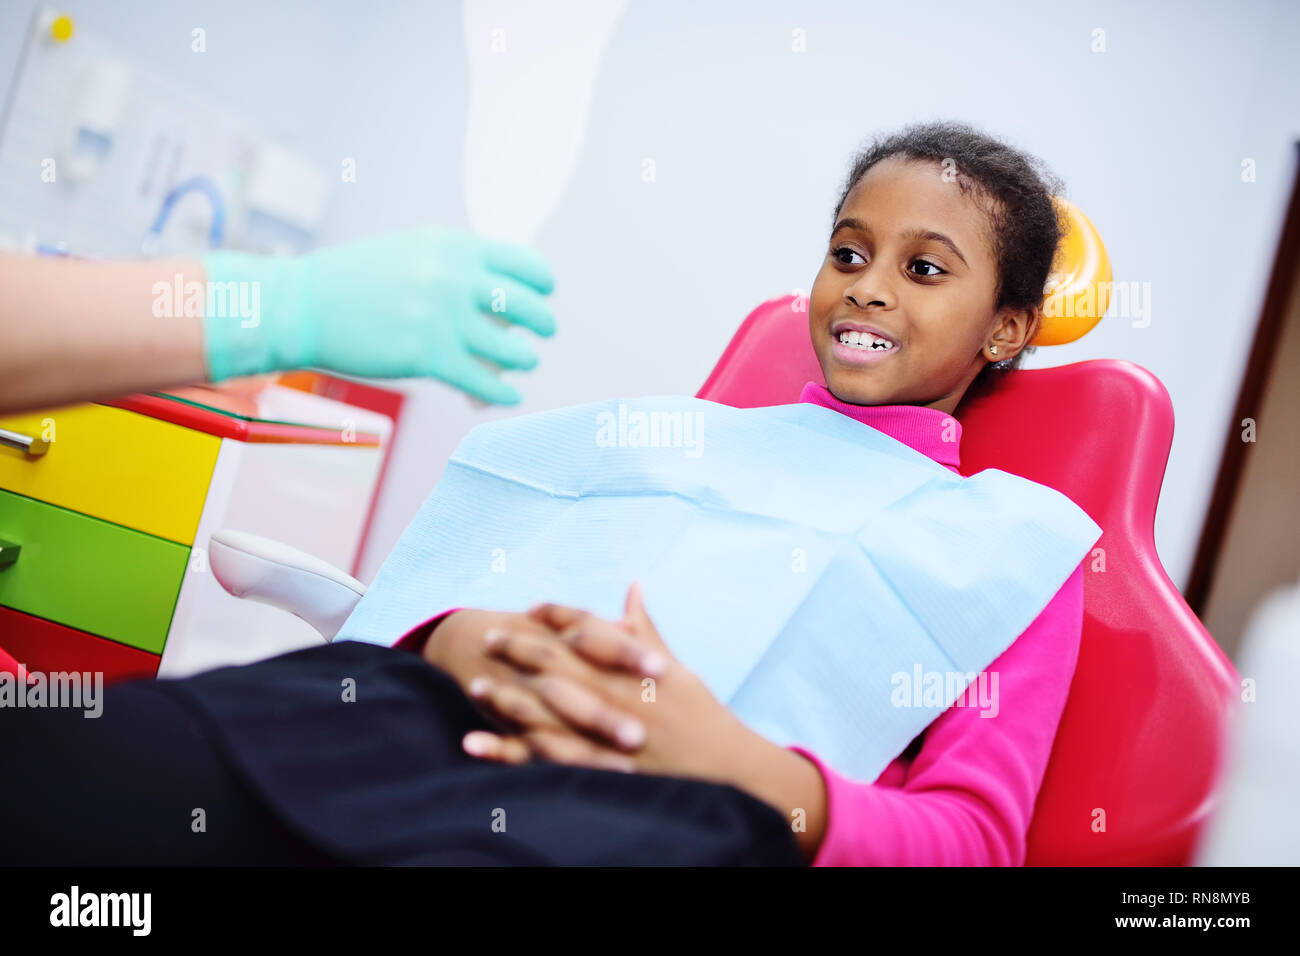 African American baby girl smiling sitting in a dental chair Stock Photo